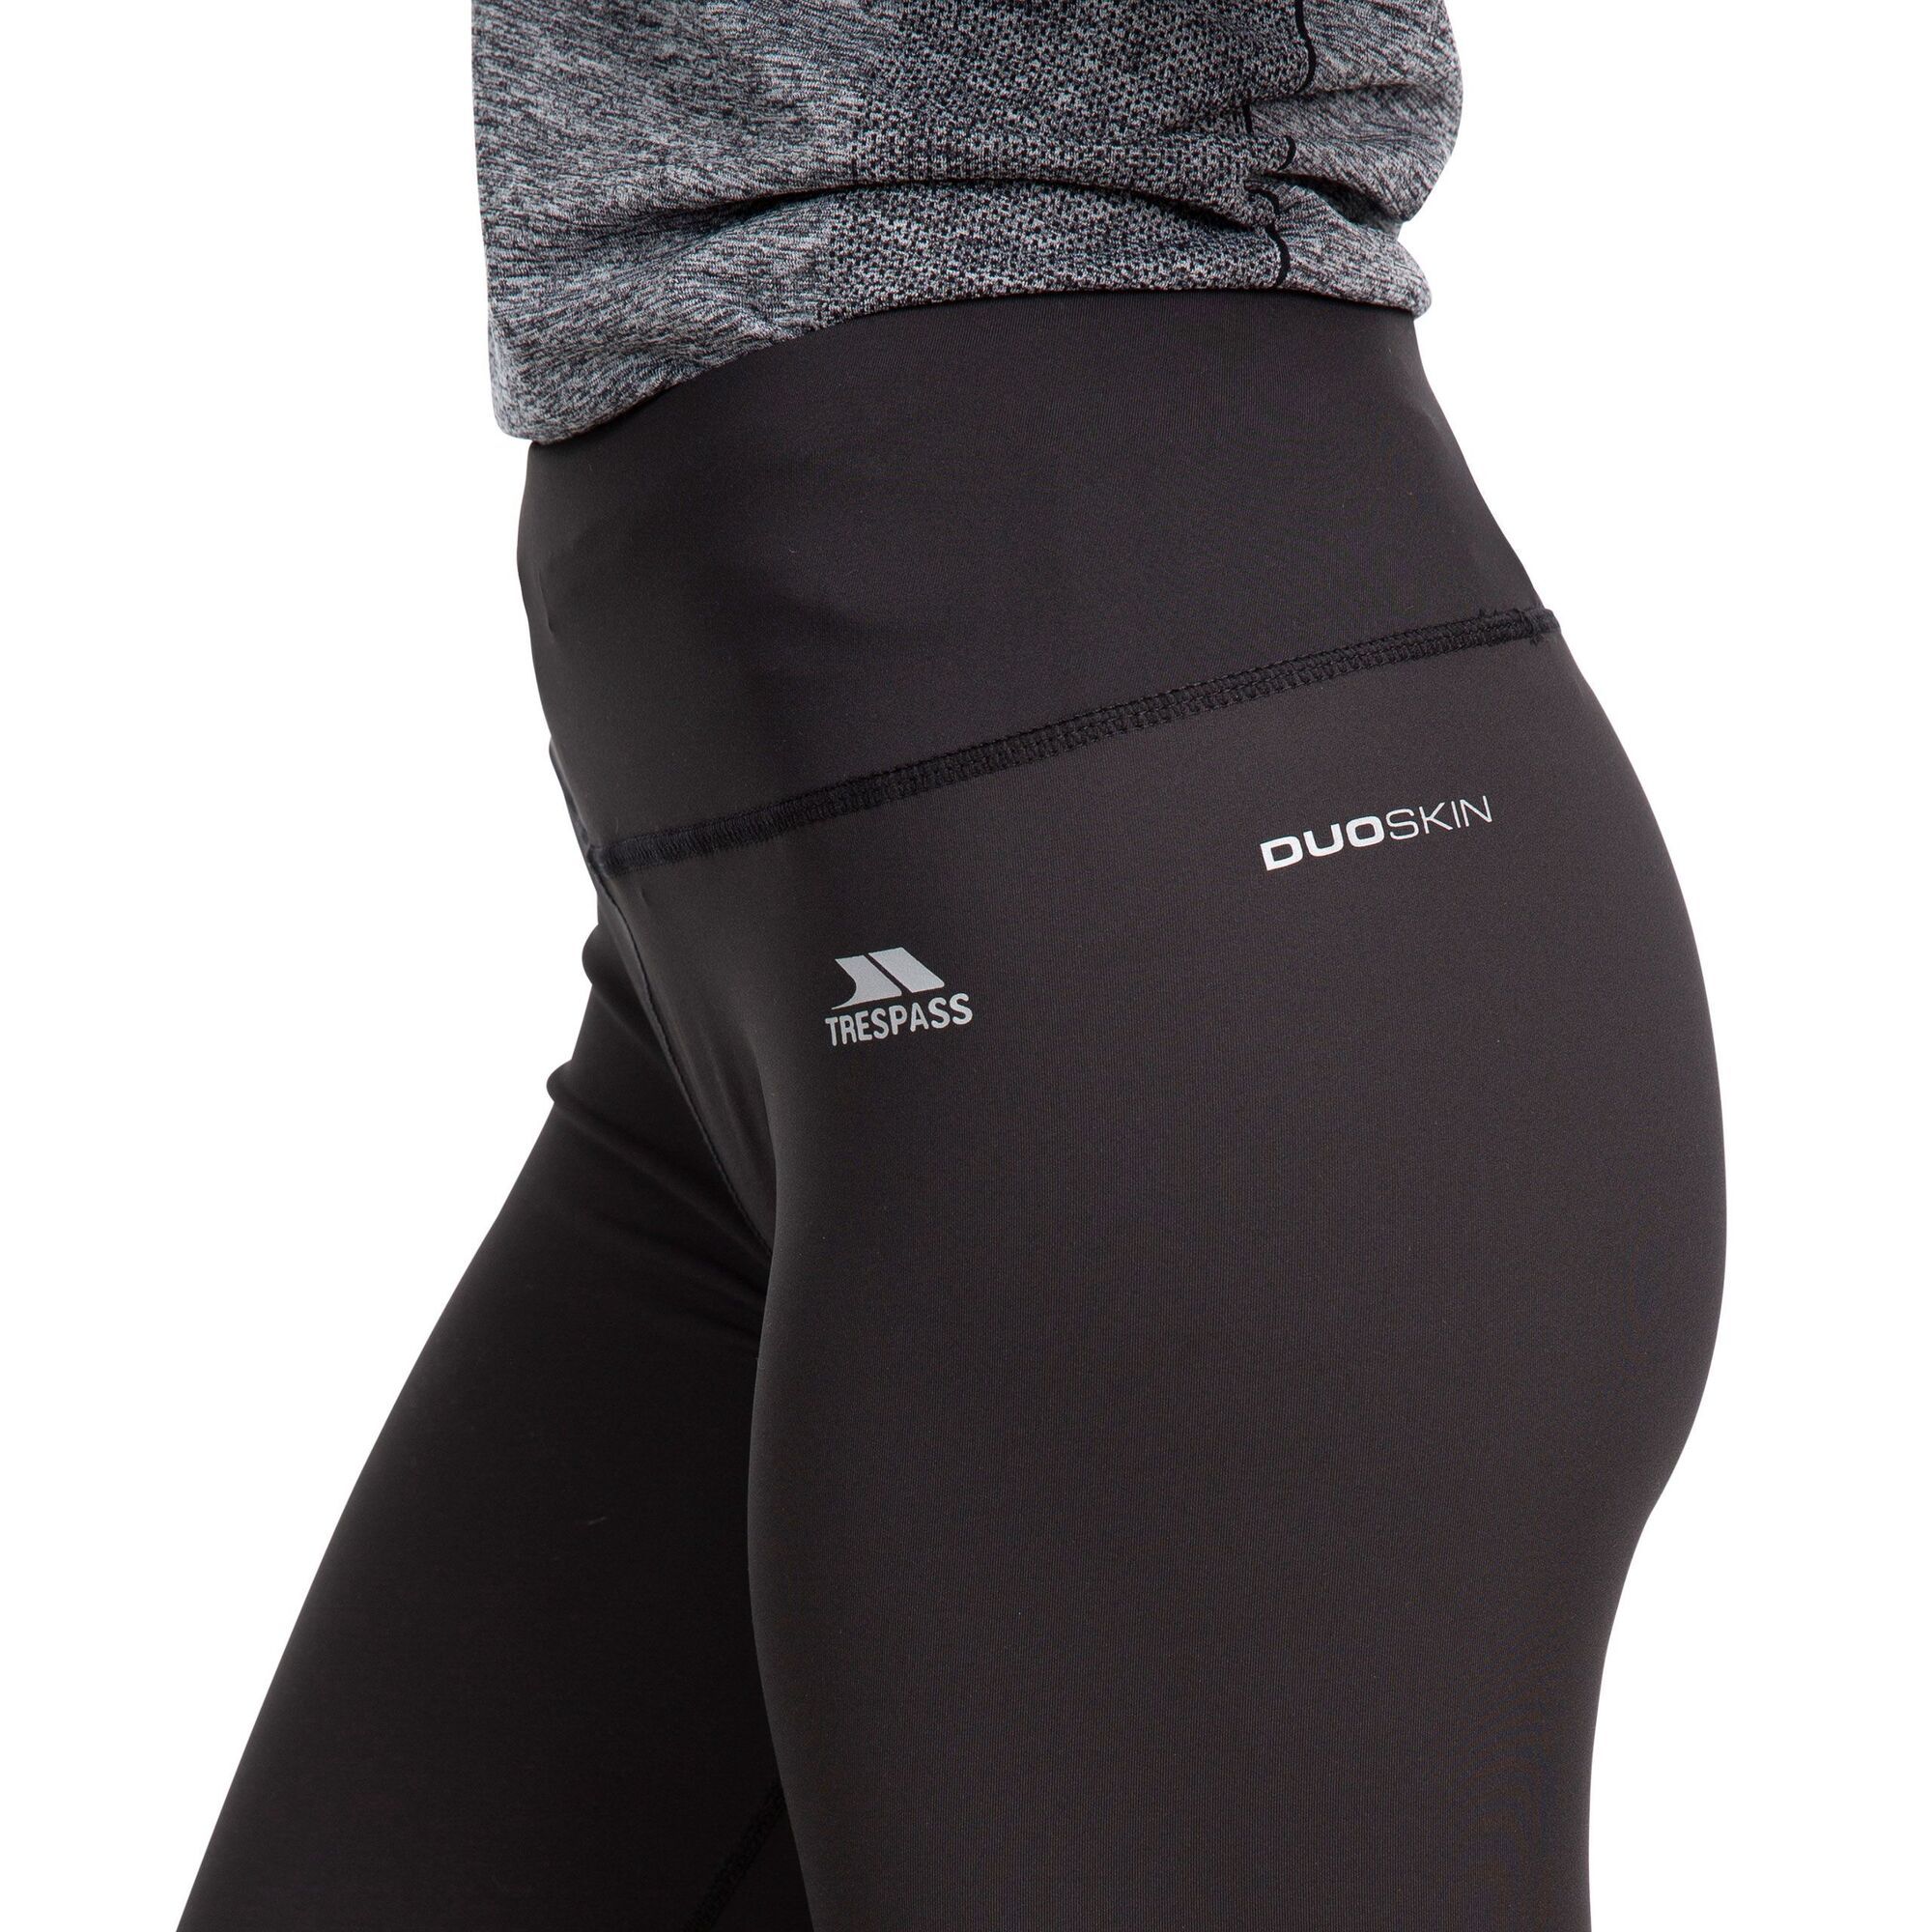 Full length. Inner drawcord at waist. Supportive waistband. Zip pocket at back waist. Reflective trims and prints. Wicking. Quick dry. 80% Polyester, 20% Elastane. Trespass Womens Waist Sizing (approx): XS/8 - 25in/66cm, S/10 - 28in/71cm, M/12 - 30in/76cm, L/14 - 32in/81cm, XL/16 - 34in/86cm, XXL/18 - 36in/91.5cm.